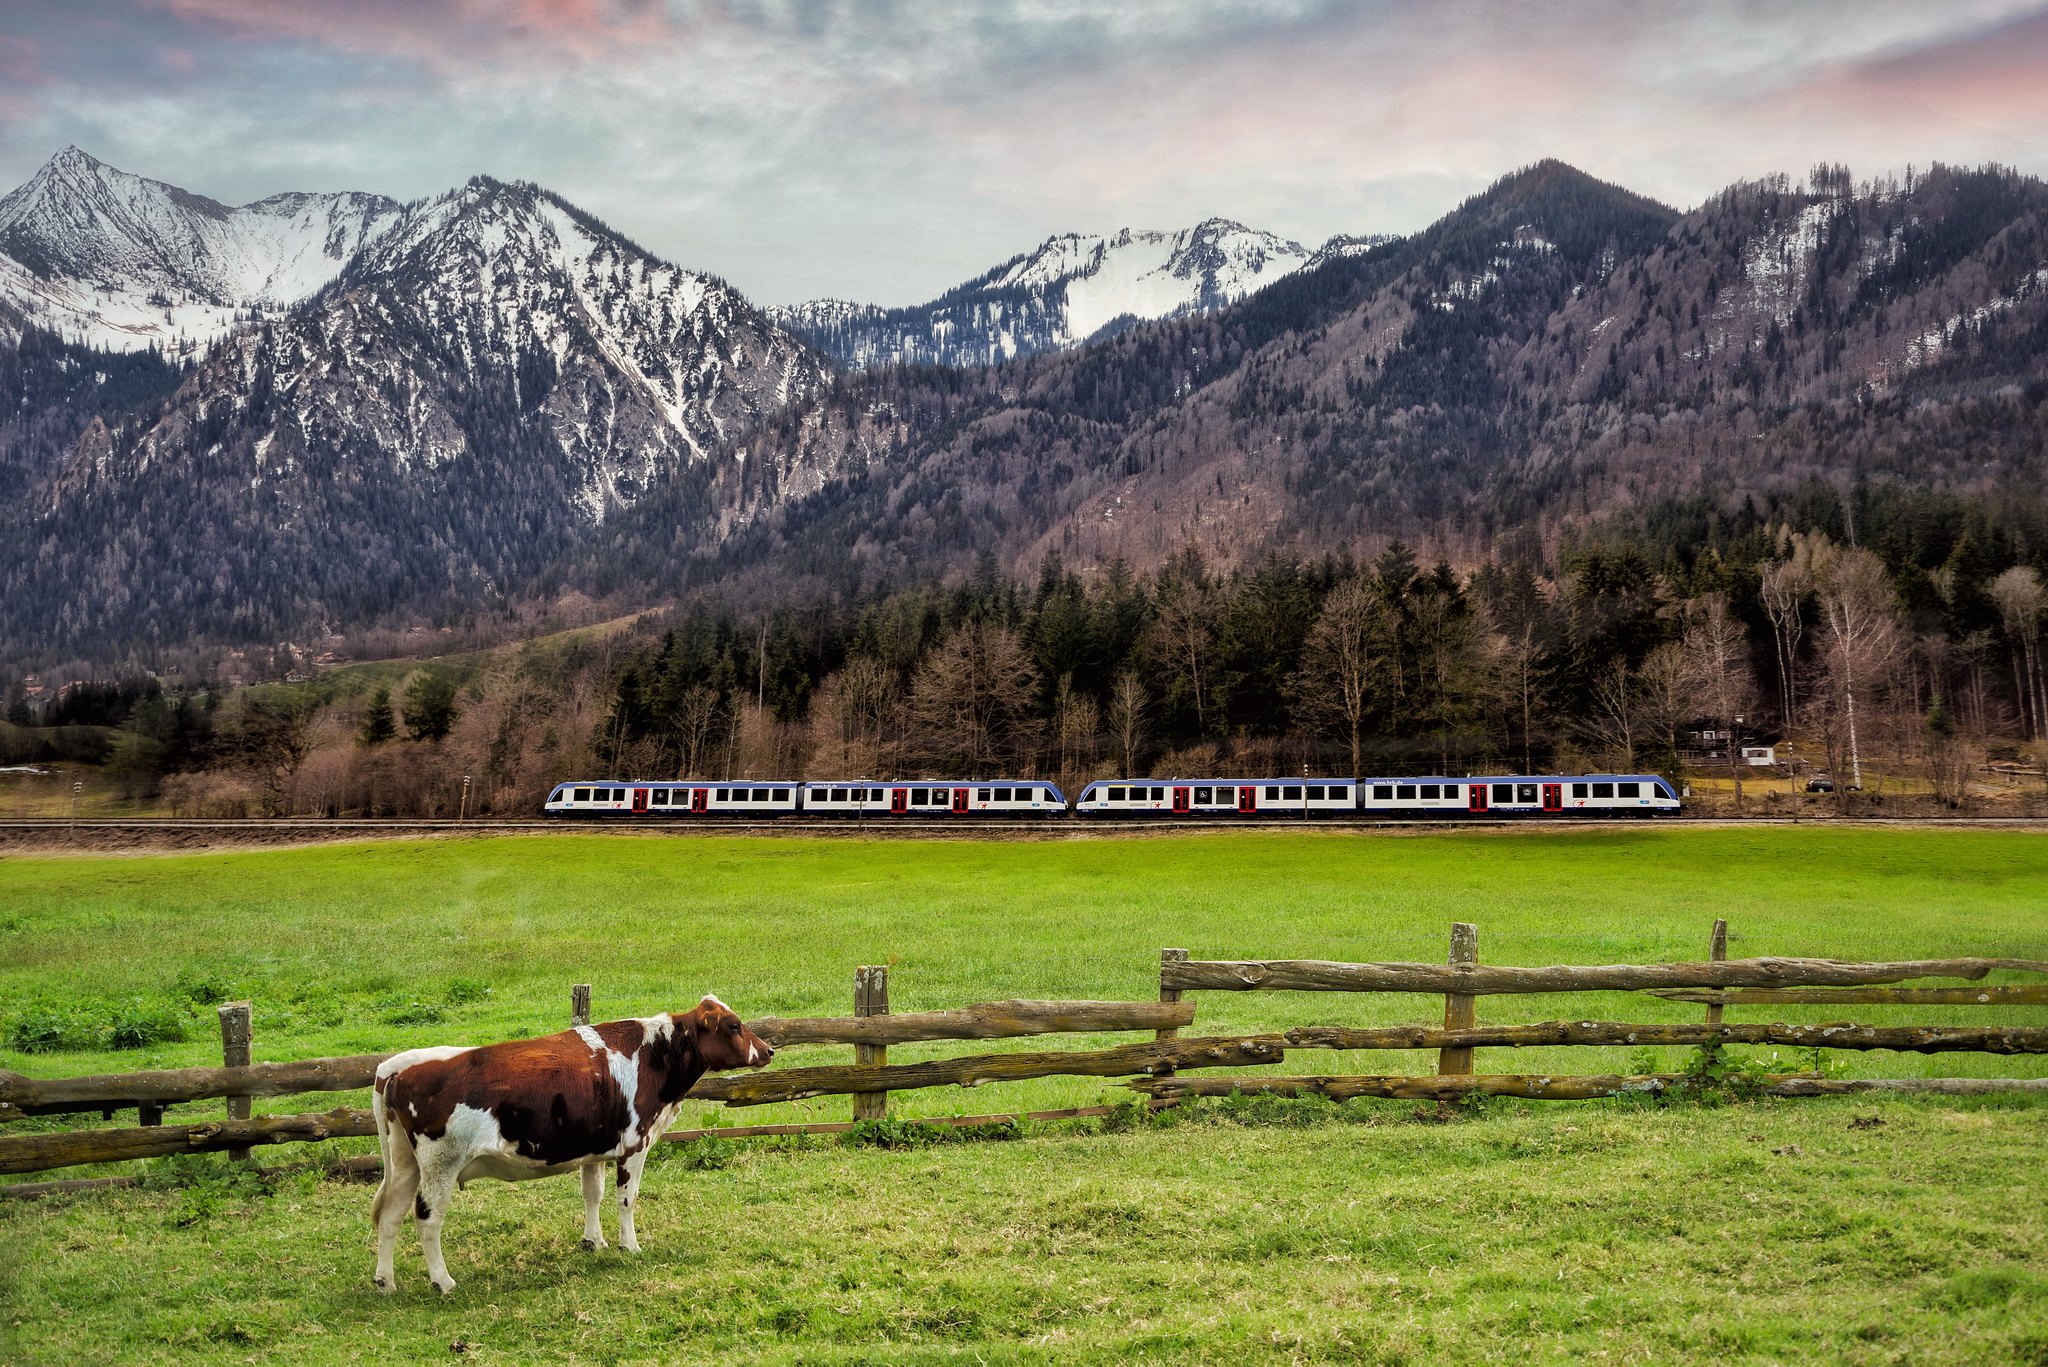 The train, the Alps and the cow..